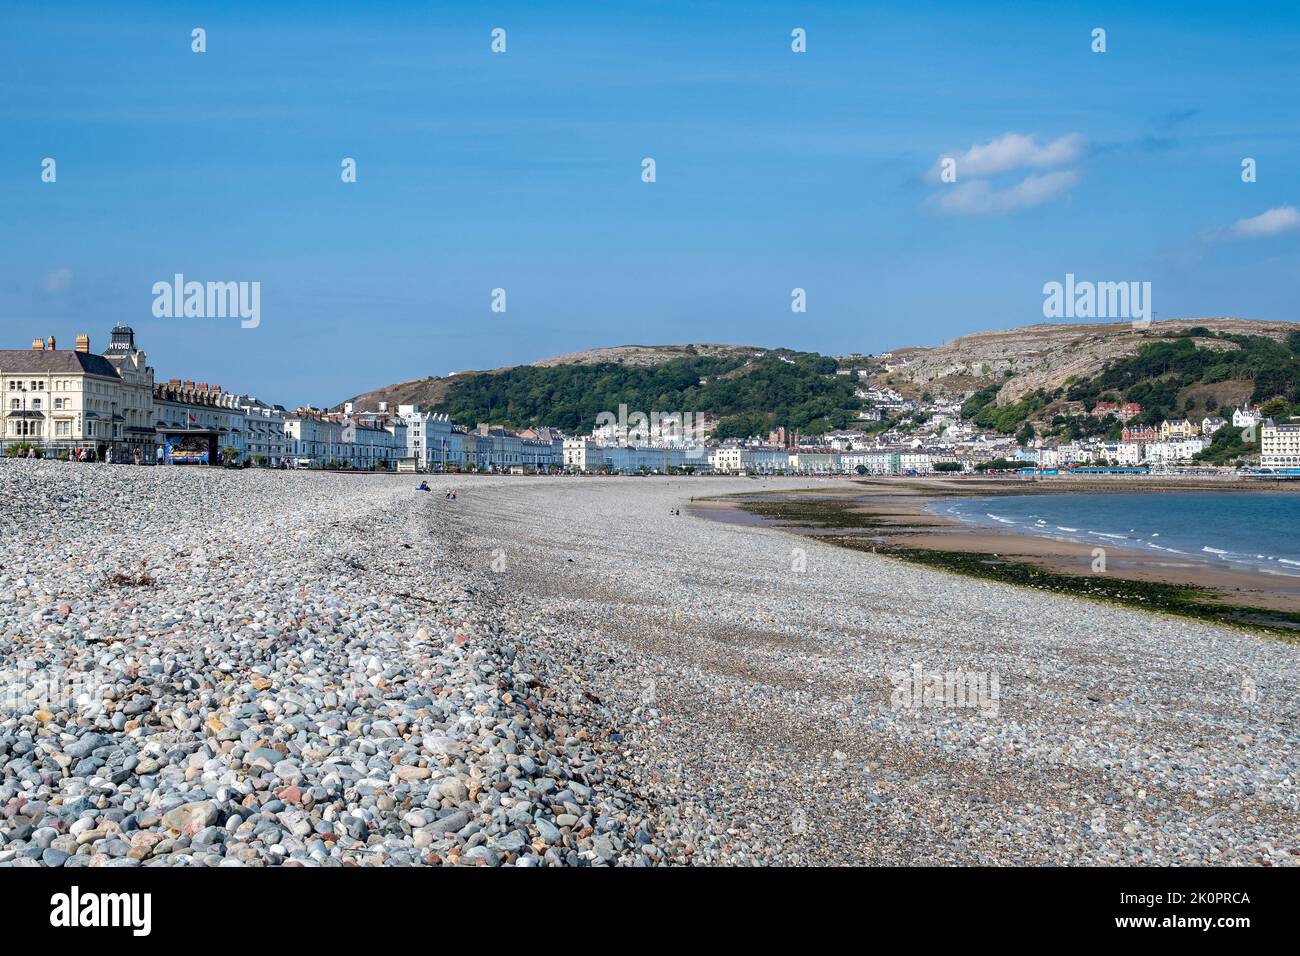 Llandudno is a coastal town in North Wales. It’s known for North Shore Beach and 19th-century Llandudno Pier. Stock Photo